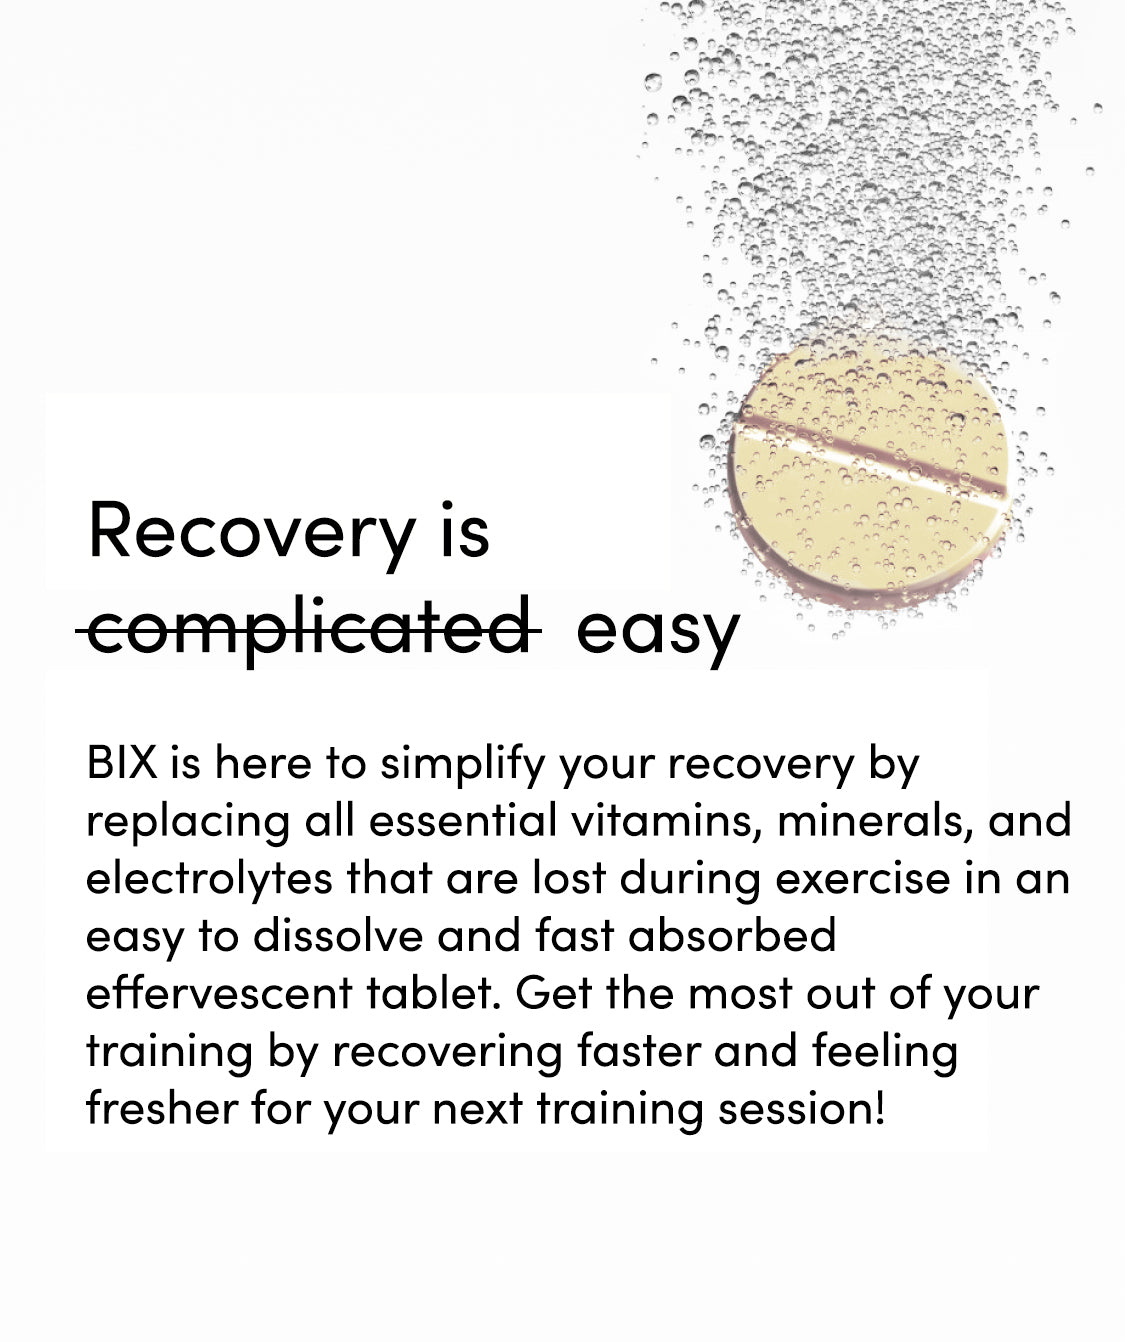 Hydration tablets to help recovery and performance for runners and athletes  